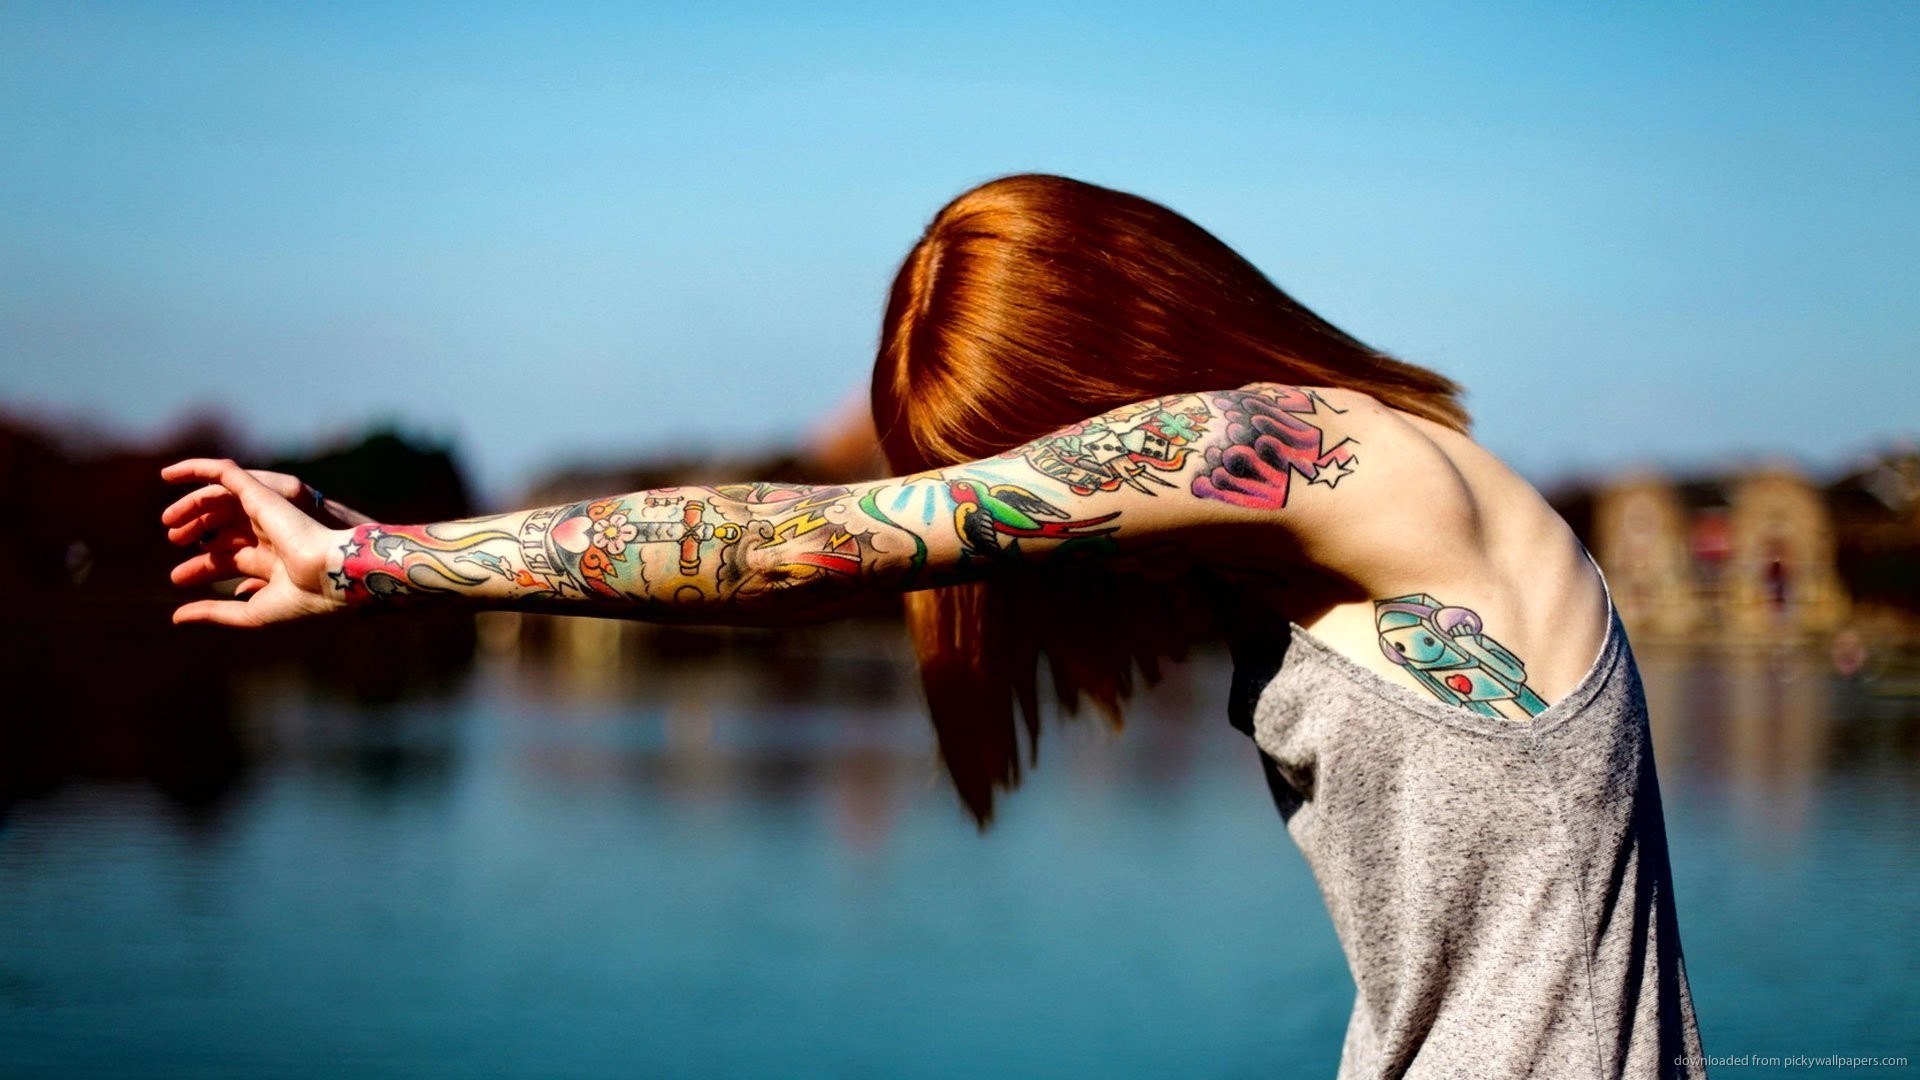 Red Girl With Colorful Tattoos Wallpaper